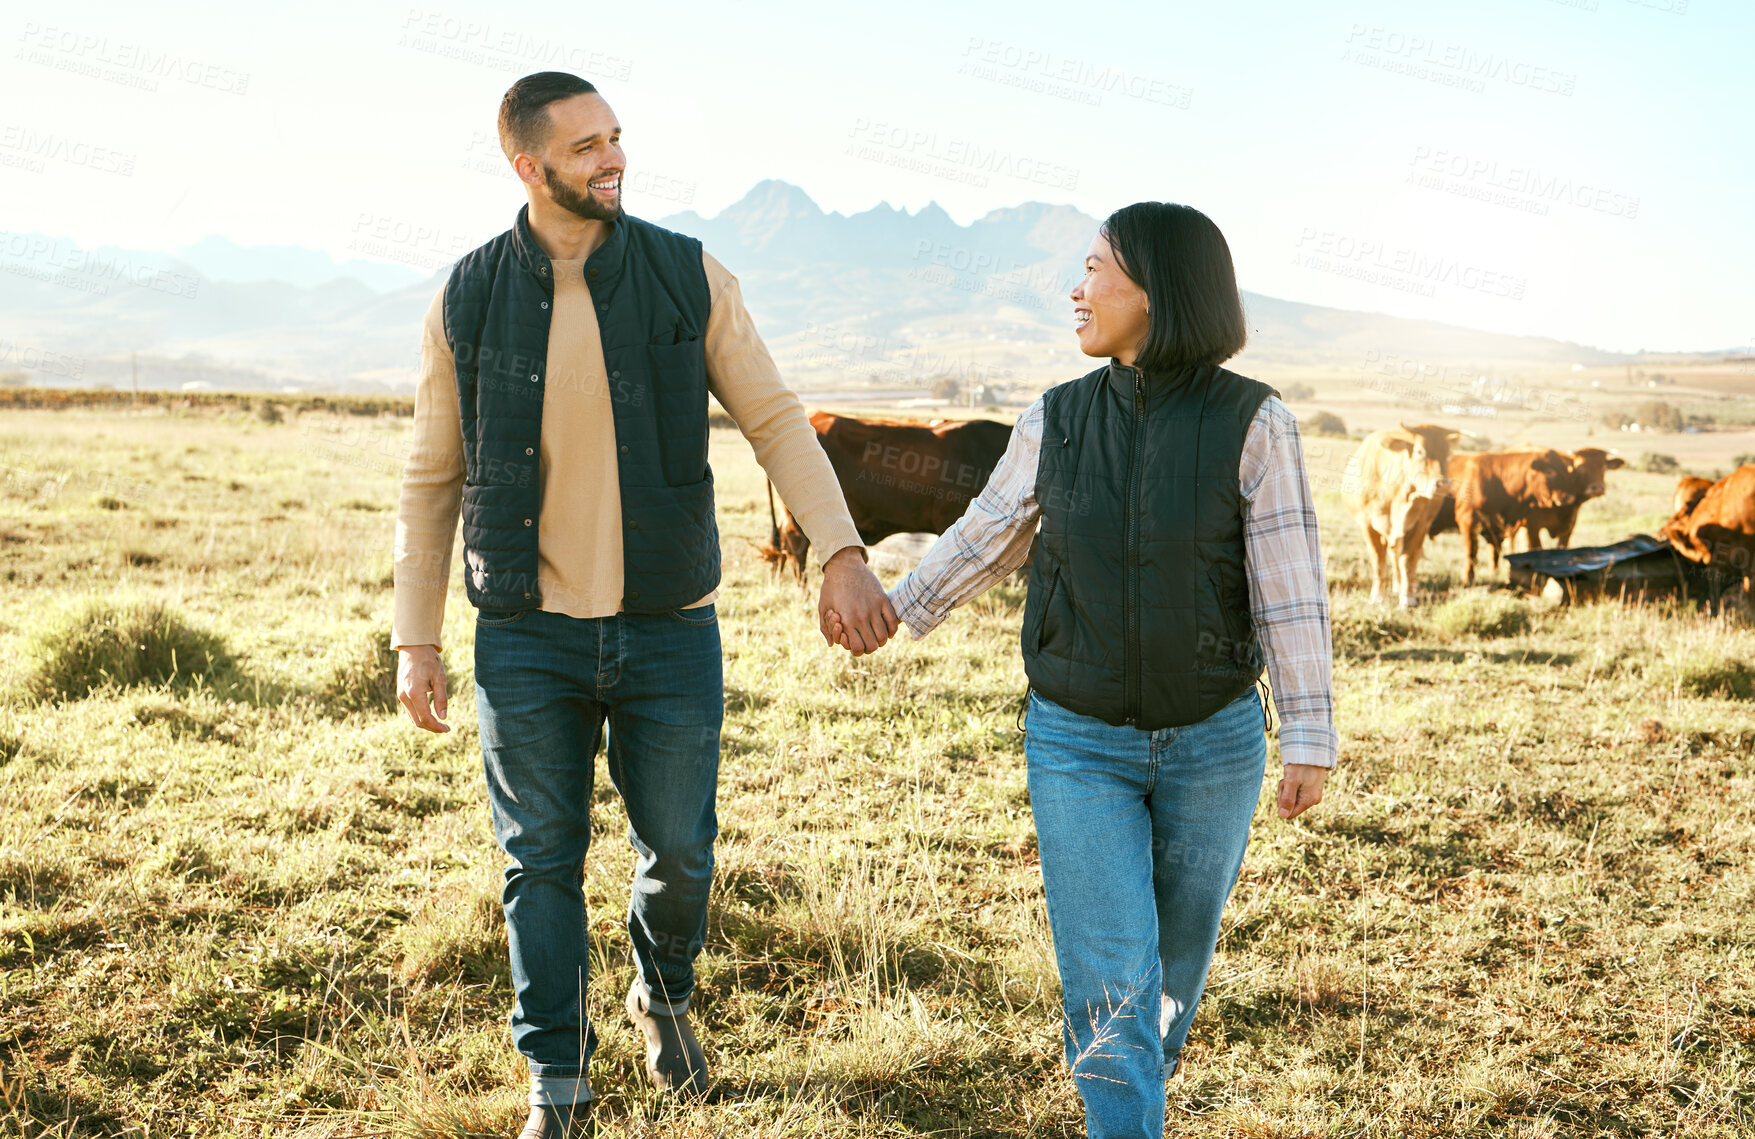 Buy stock photo Farmer couple, cattle farming and happy while holding hands and walking together on grass field of a sustainable farm with cow animals. Woman and man with support for rural countryside lifestyle